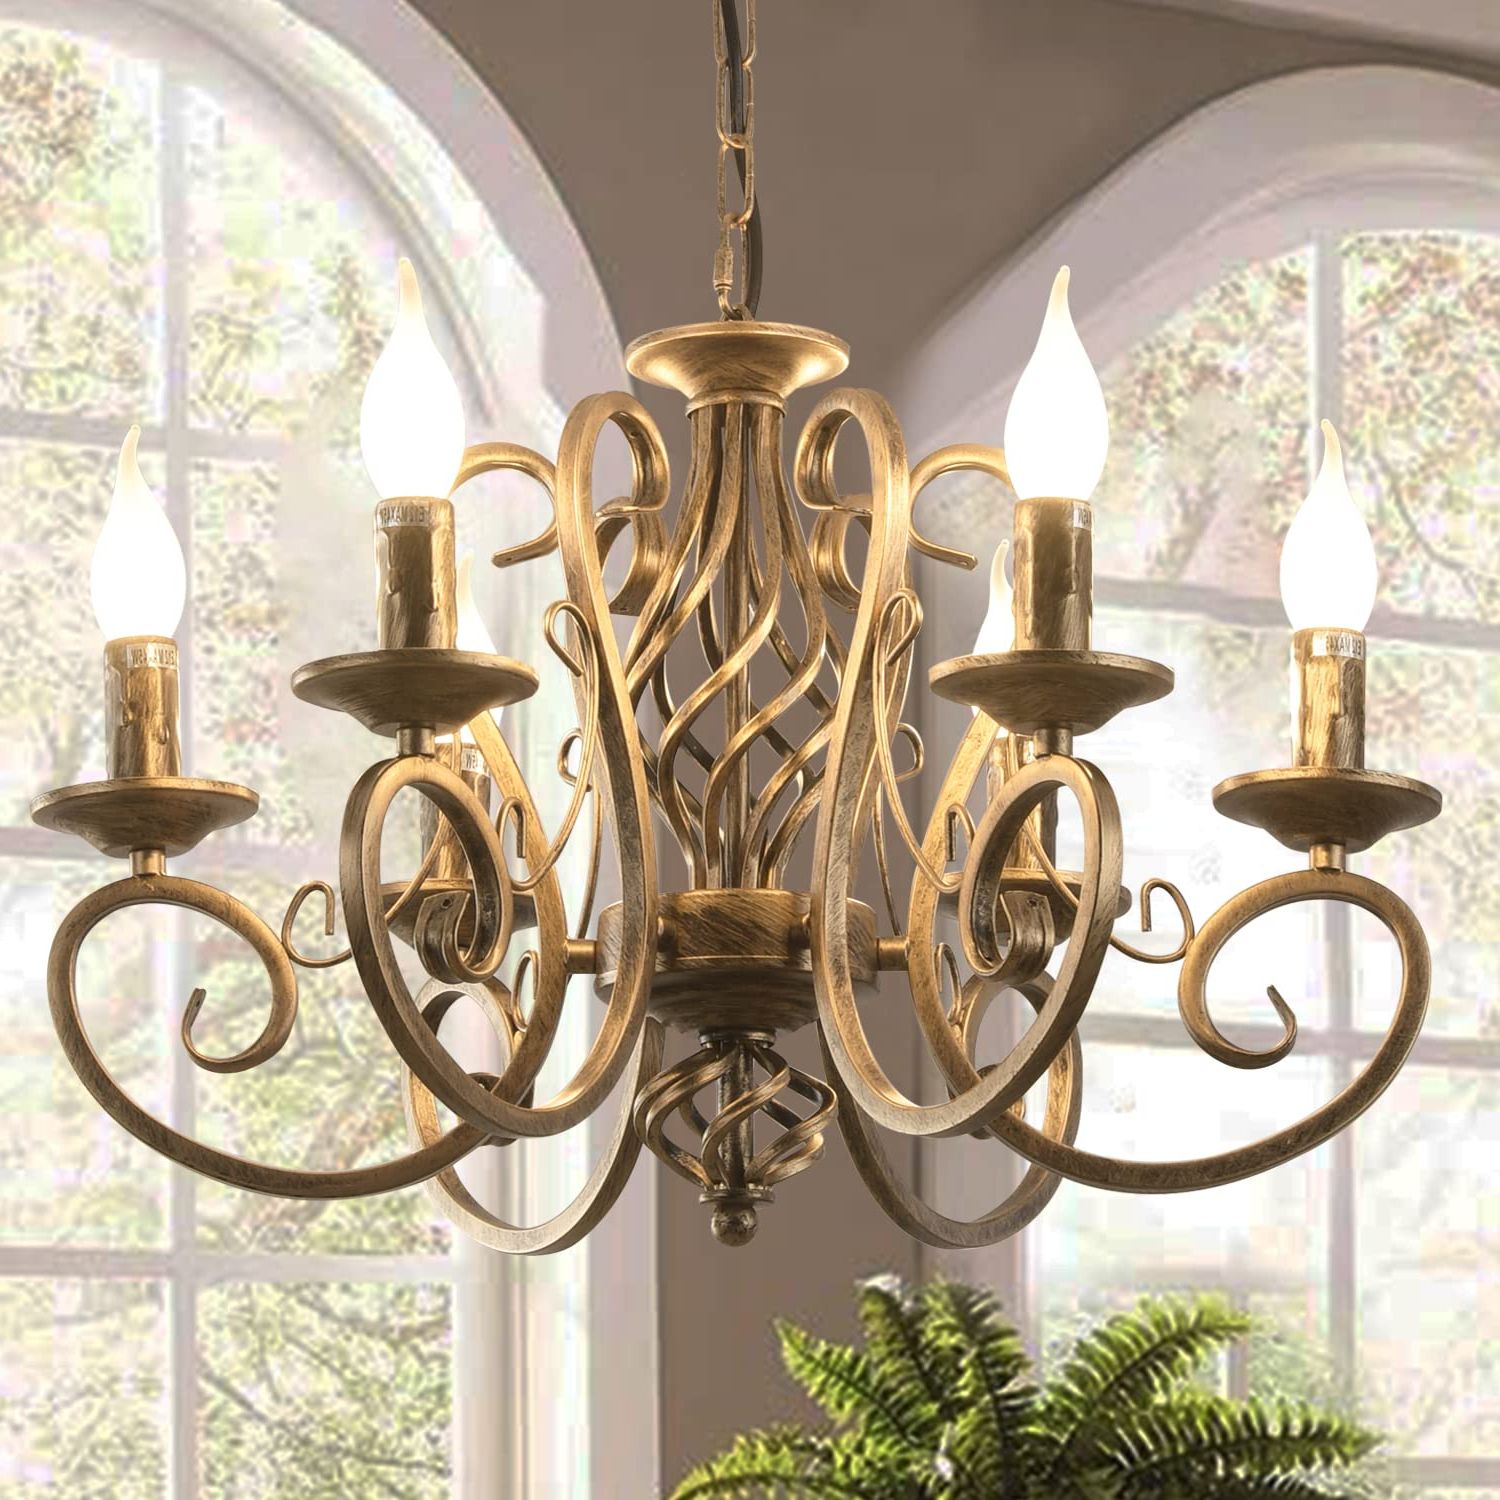 Ganeed French Country Chandeliers,6 Lights Candle Wrought Iron Chandelier,rustic  Farmhouse Pendant Light Fixture Hanging Lighting For Kitchen Island,dining  Room,living Room,foryer – – Amazon For Preferred County French Iron Lantern Chandeliers (View 9 of 15)